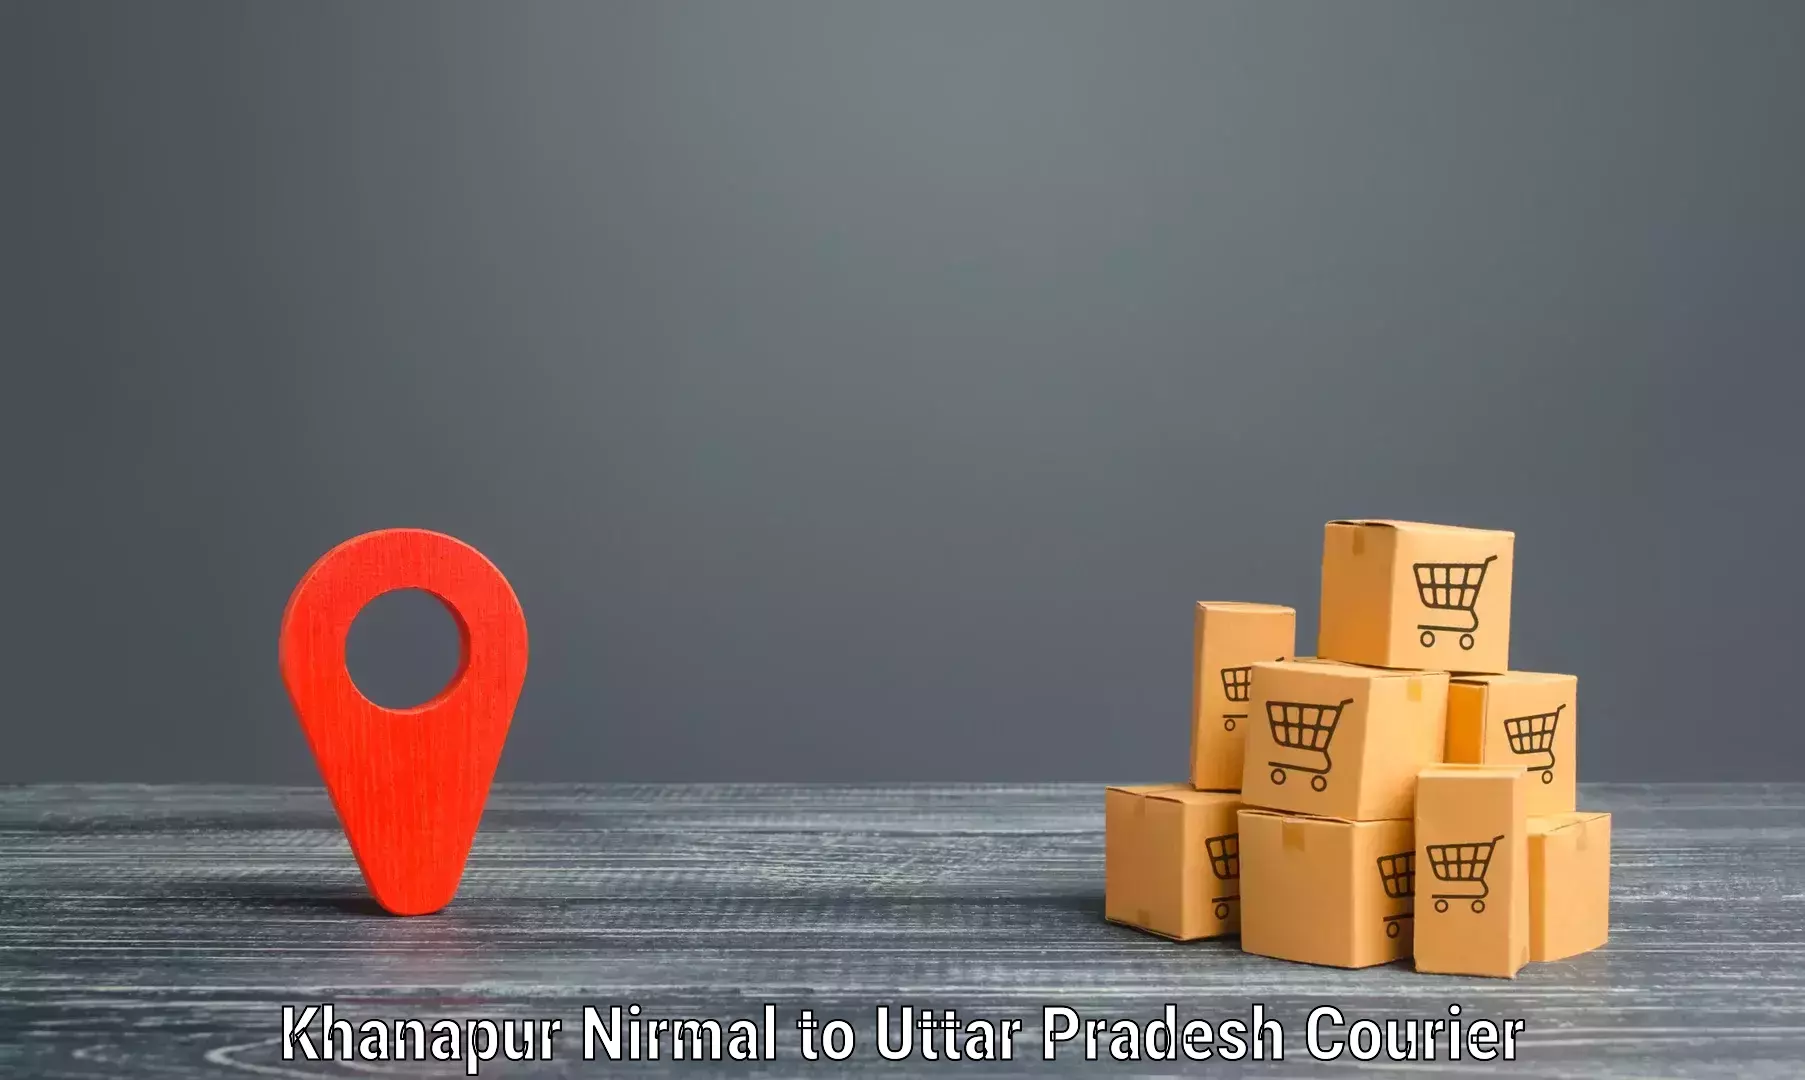 Courier service innovation in Khanapur Nirmal to Khalilabad